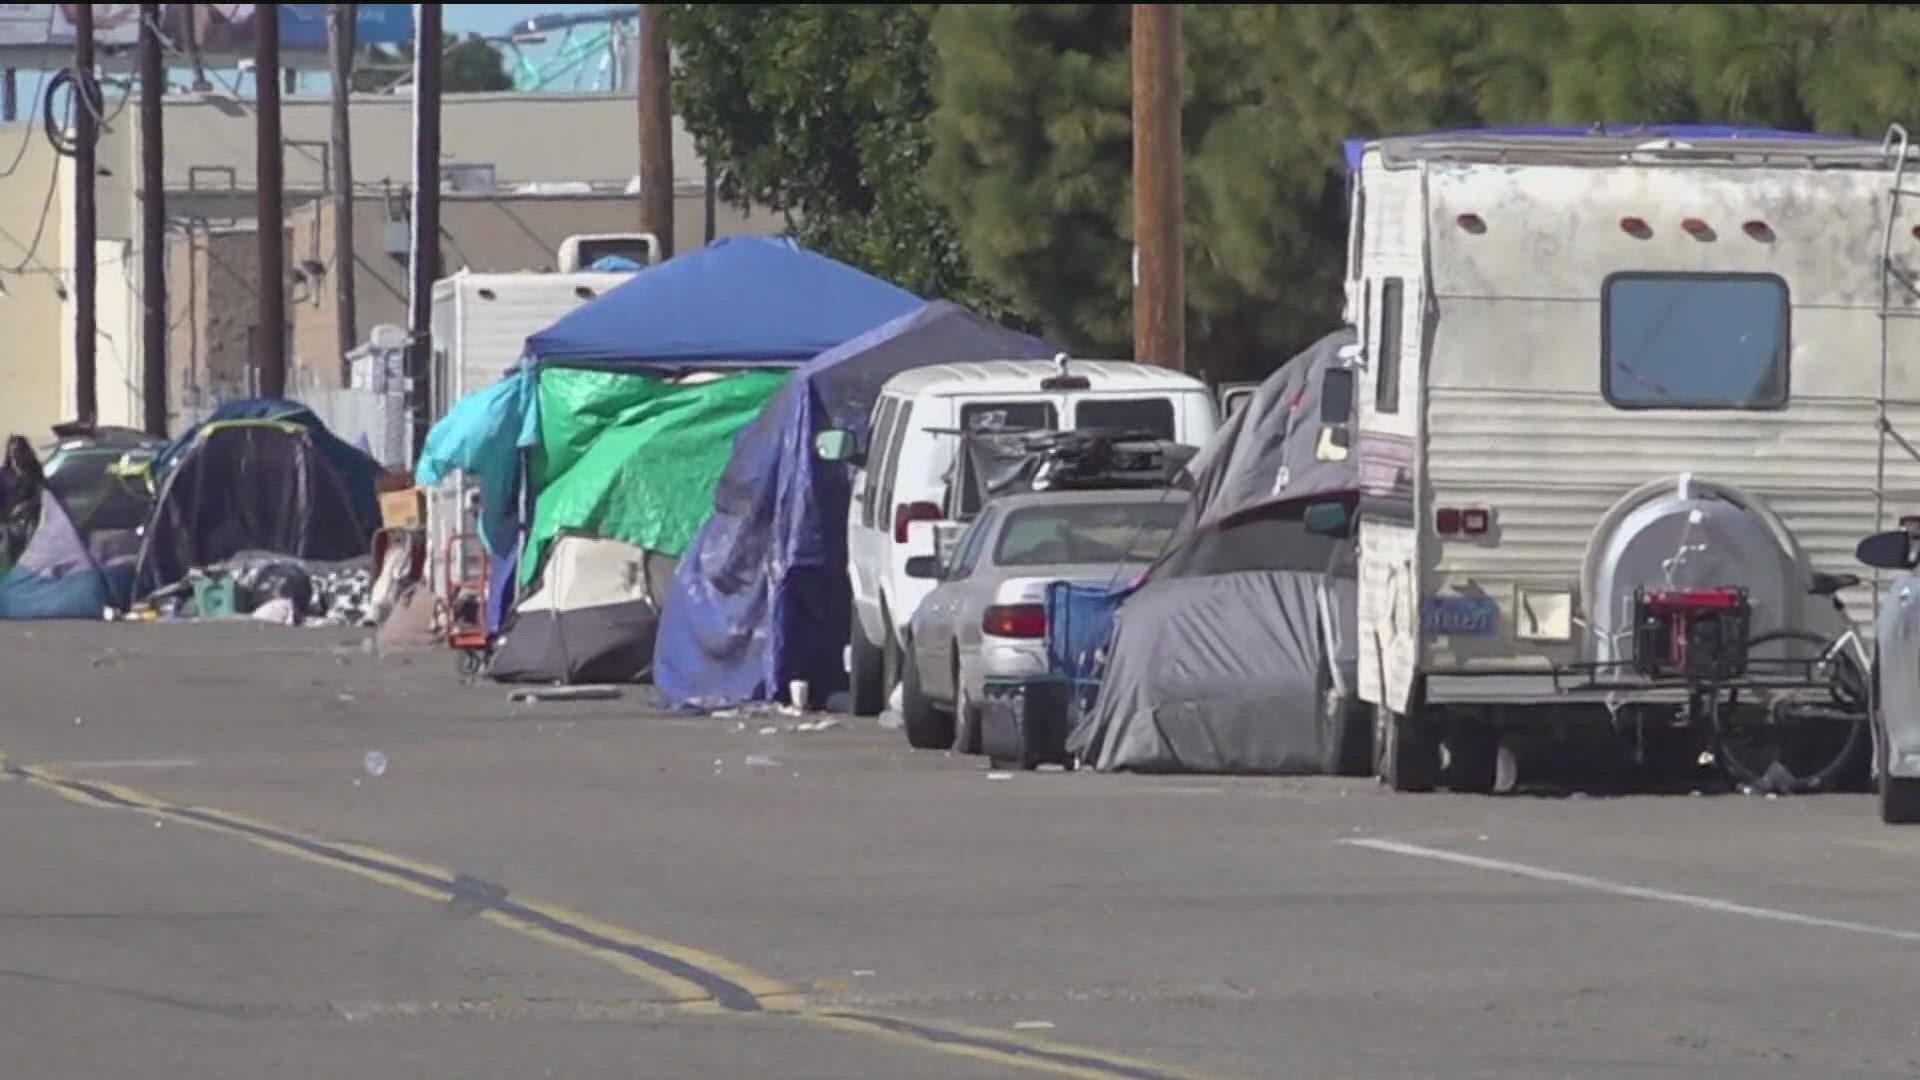 San Diego County announced two new programs Tuesday to address the housing and growing homeless crisis.